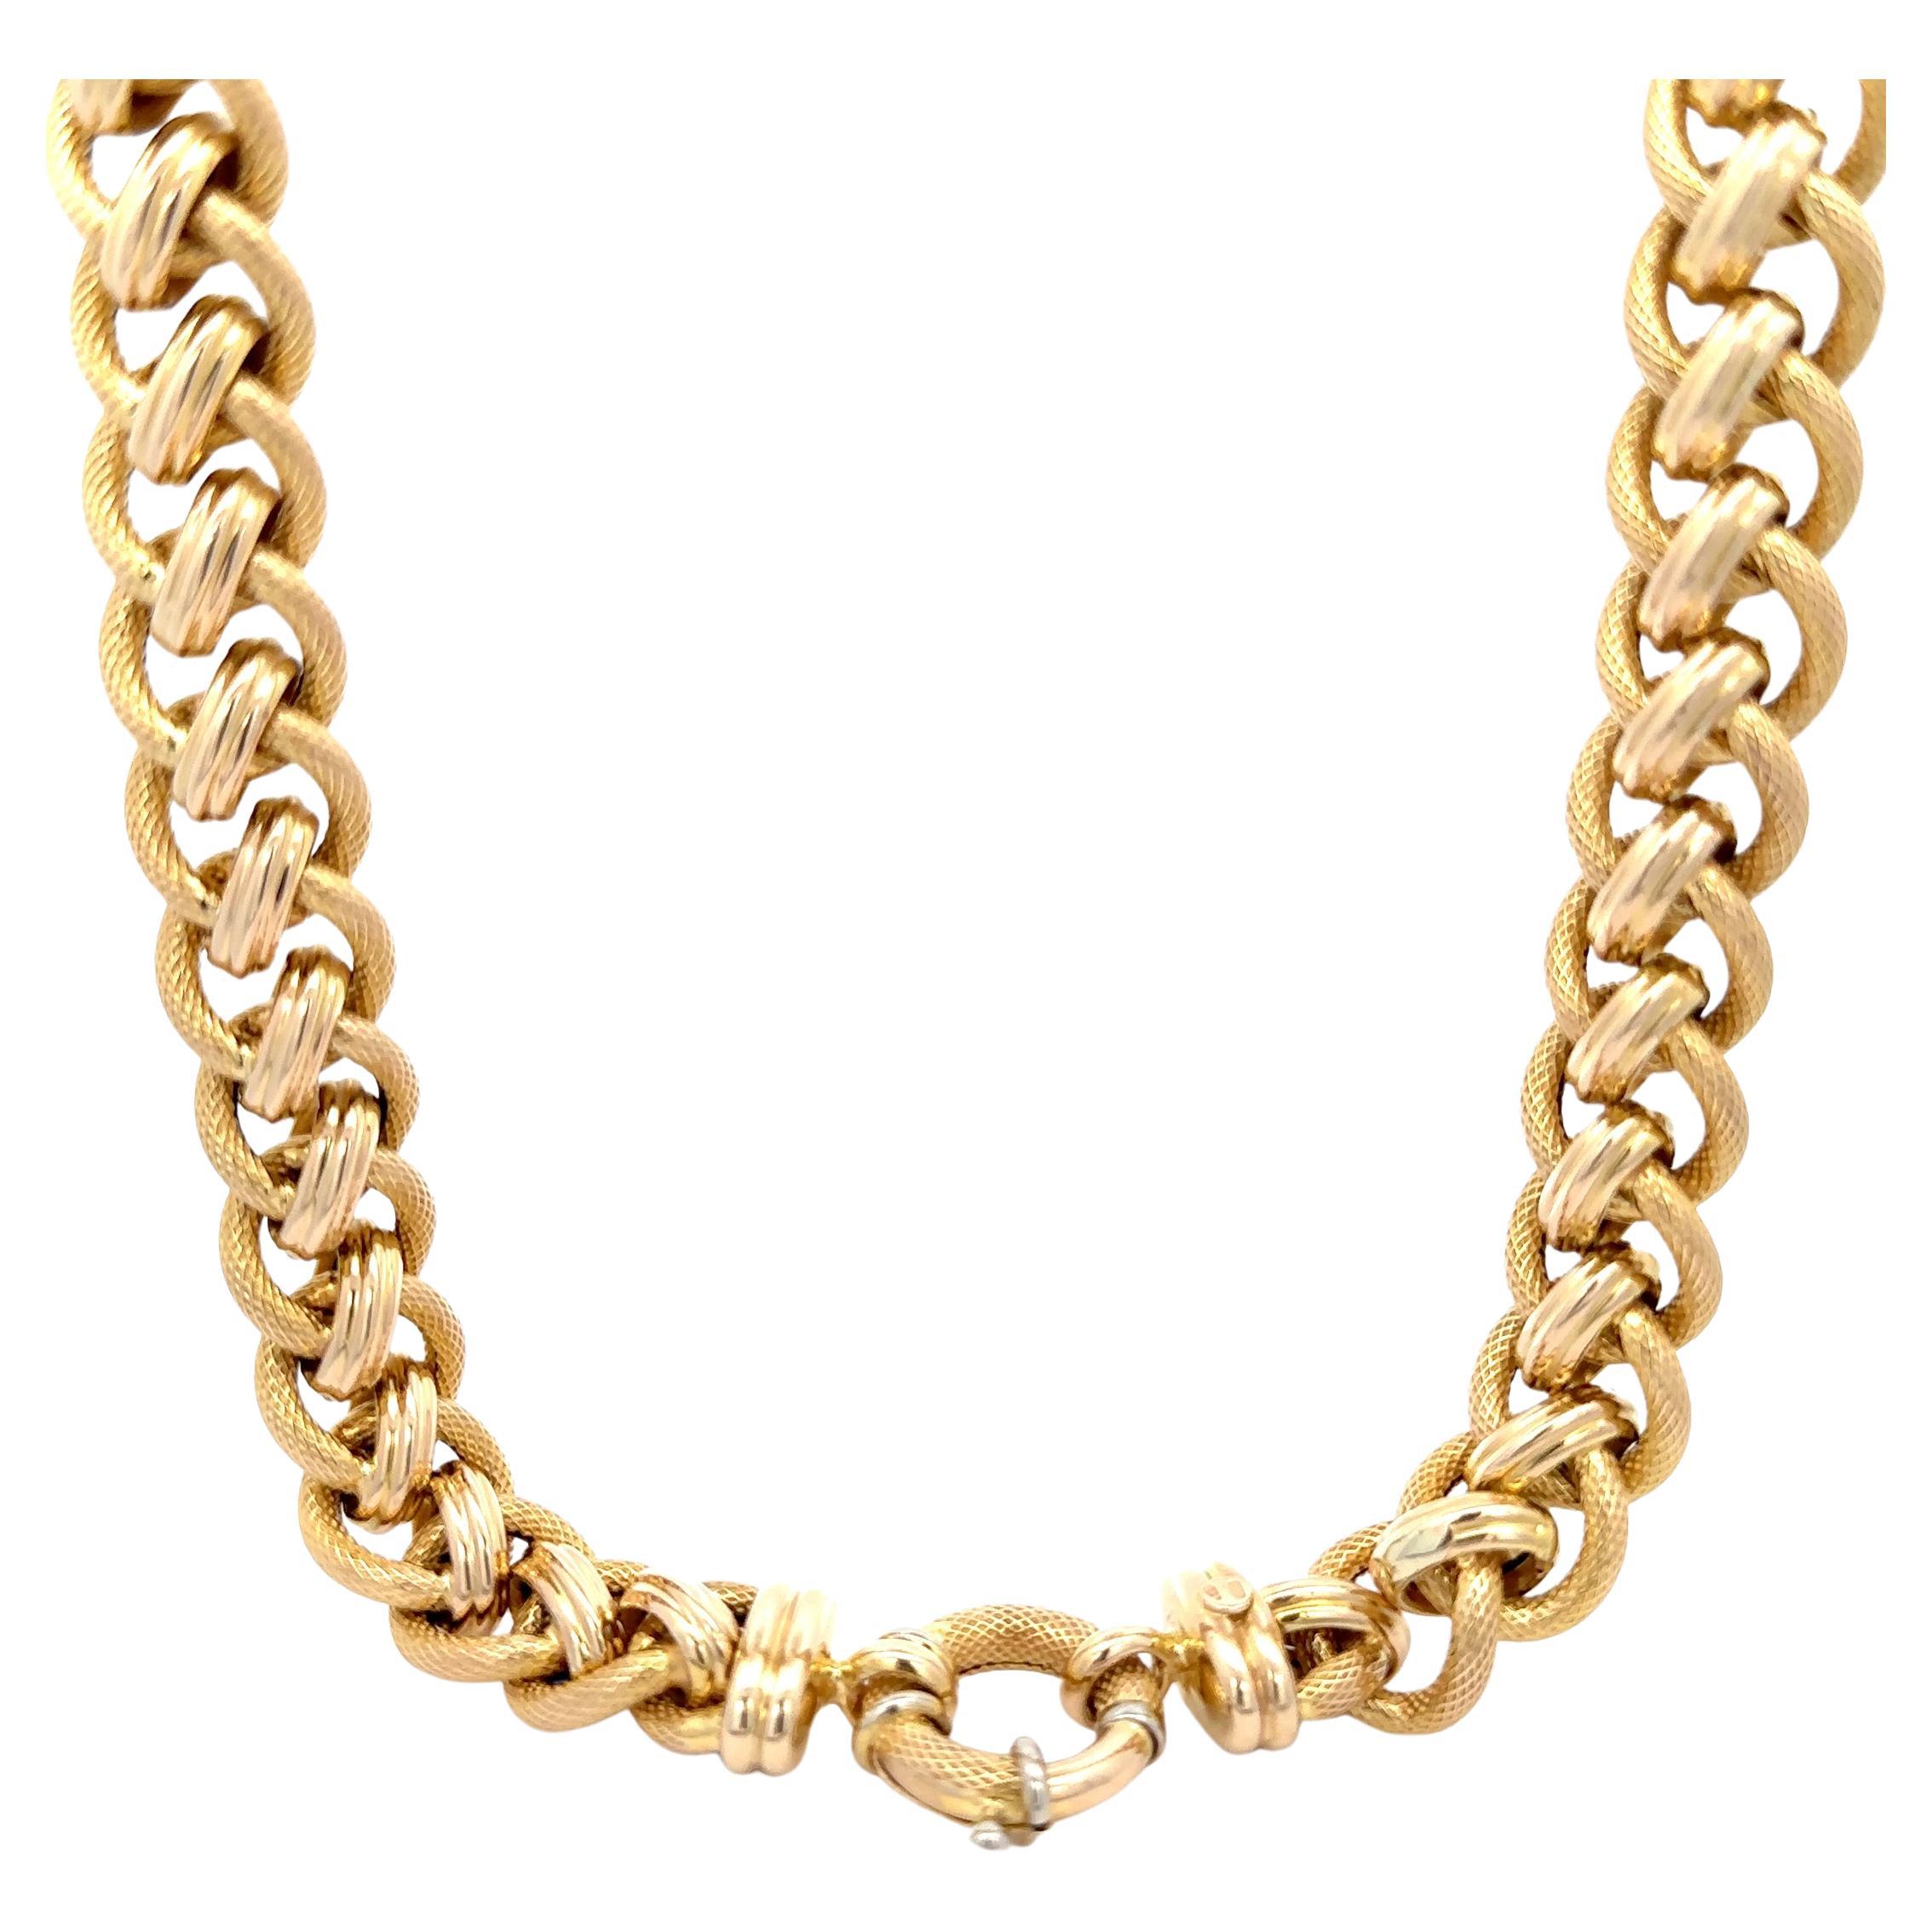 Italian 14k Yellow Gold 17" Wide Interlocking Textured & Polished Link Necklace For Sale